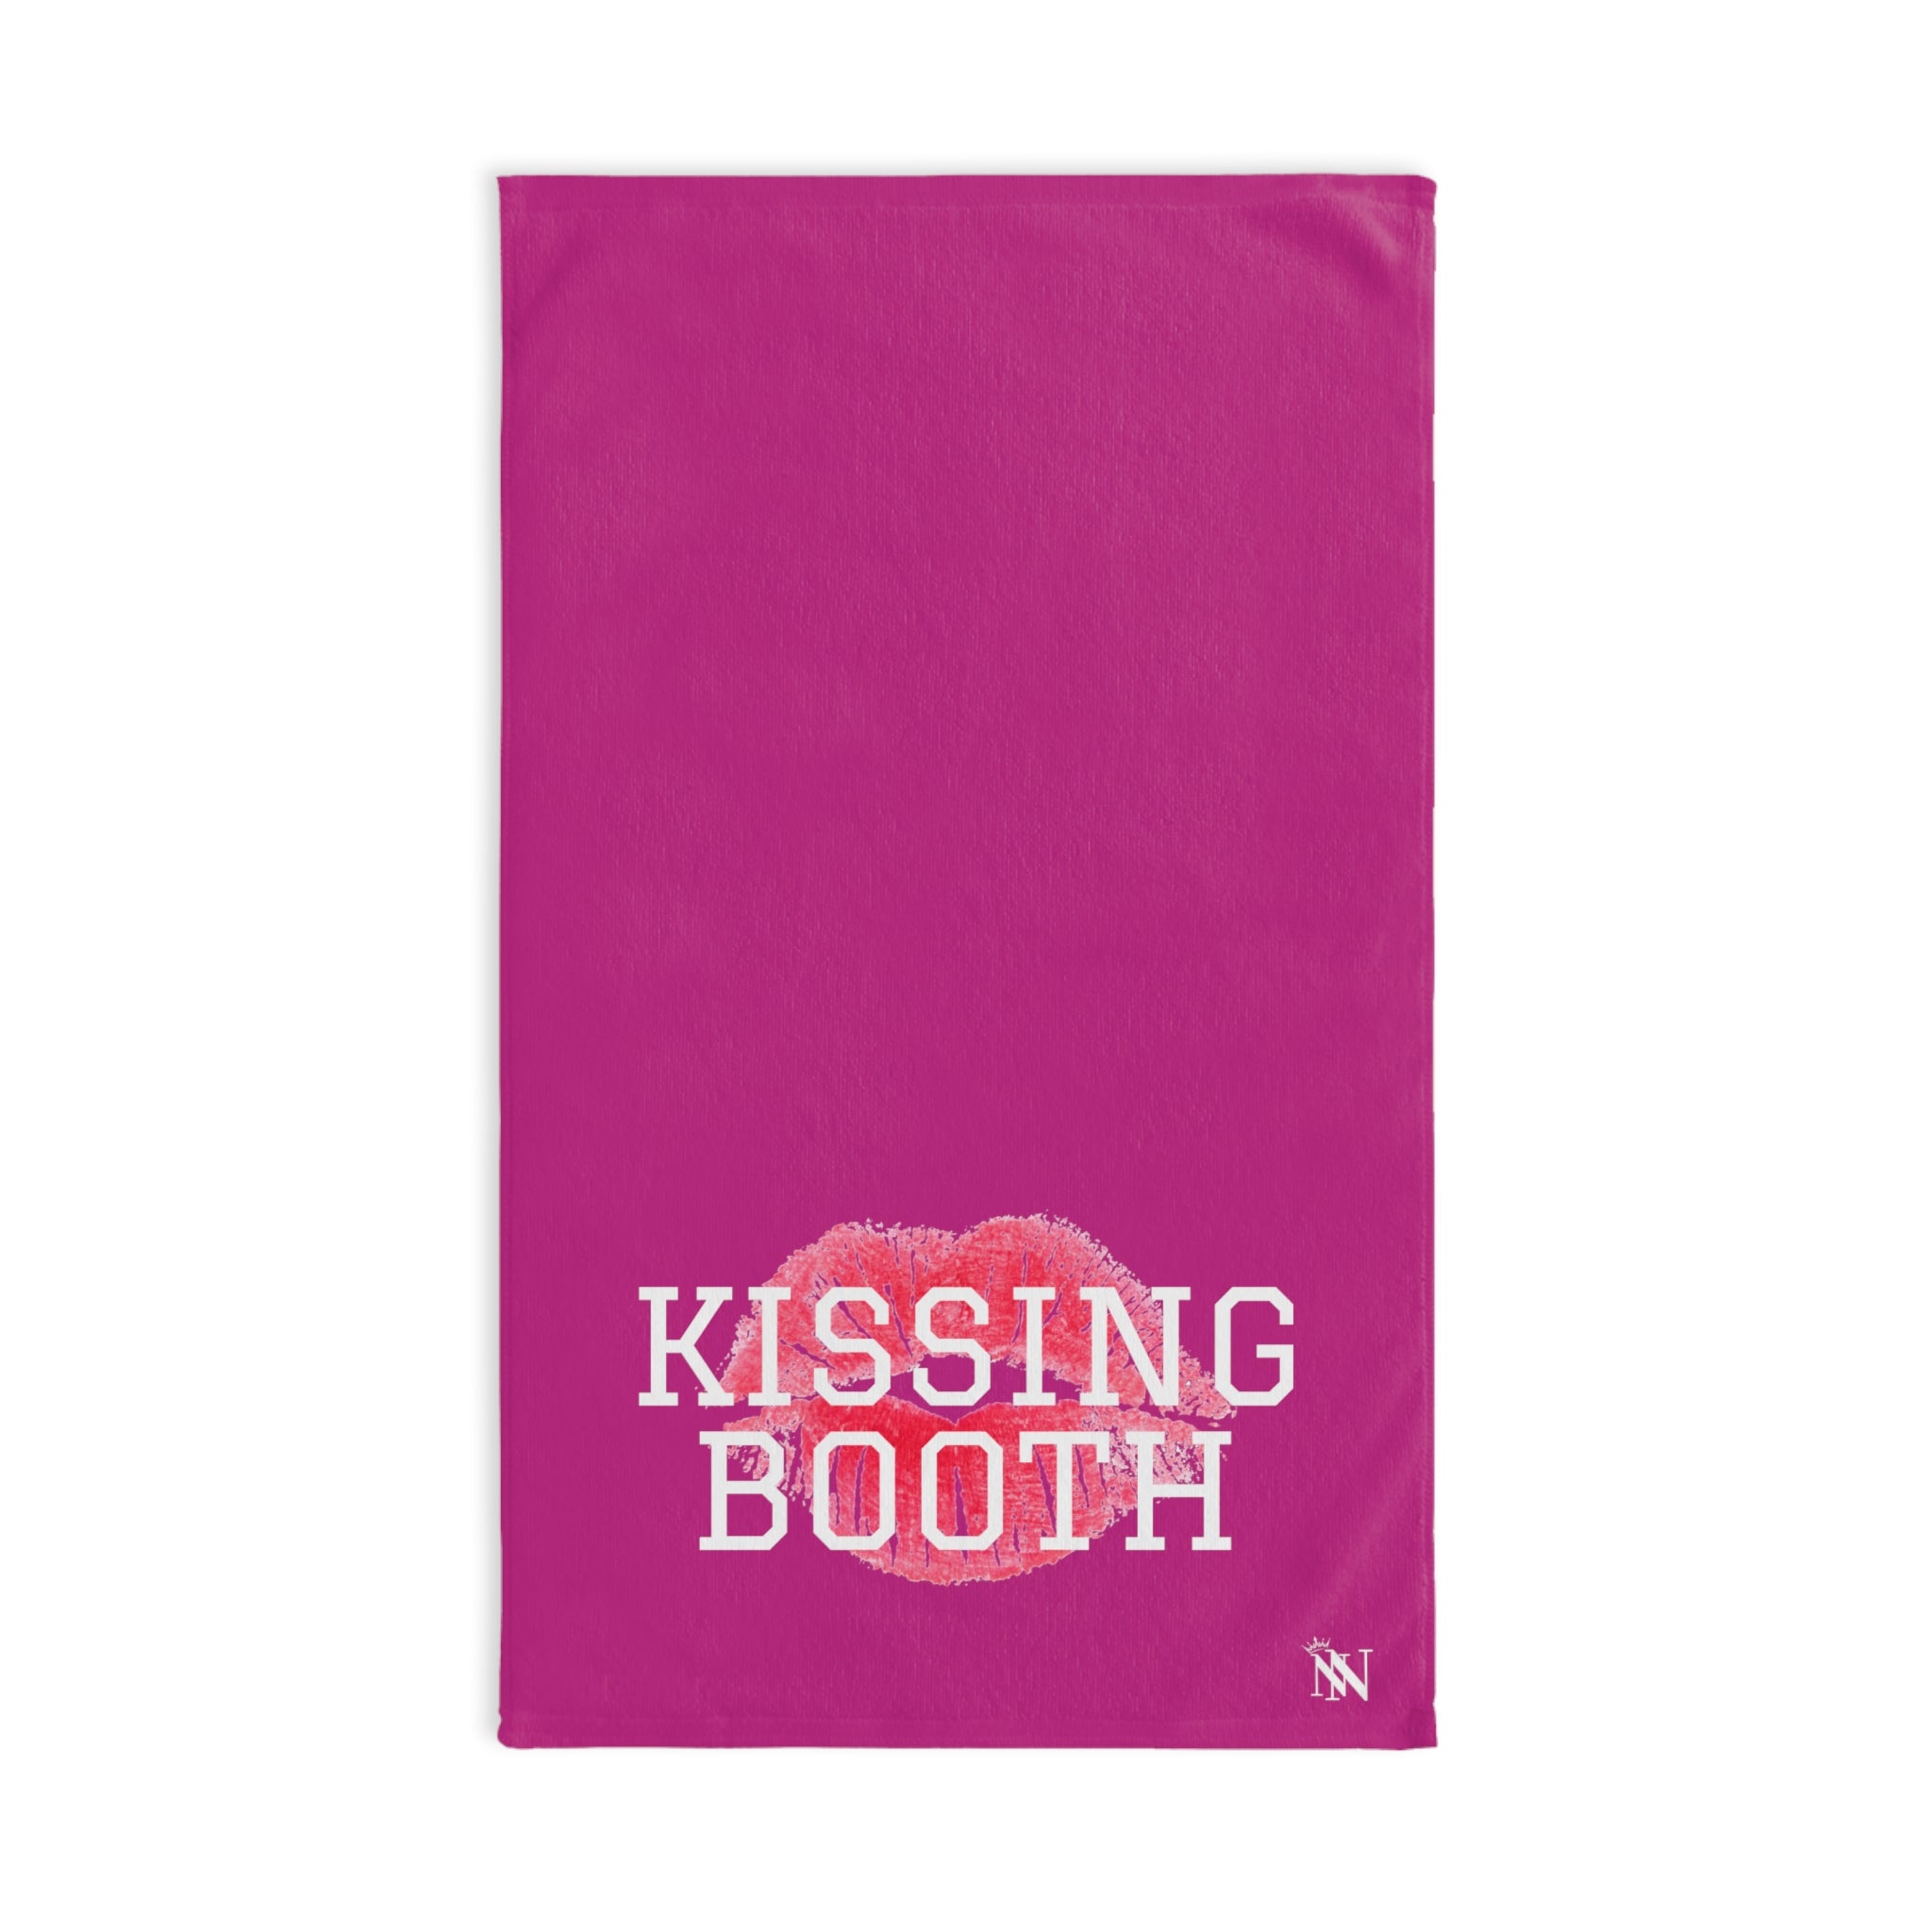 Kissing Booth Lips Fuscia | Funny Gifts for Men - Gifts for Him - Birthday Gifts for Men, Him, Husband, Boyfriend, New Couple Gifts, Fathers & Valentines Day Gifts, Hand Towels NECTAR NAPKINS